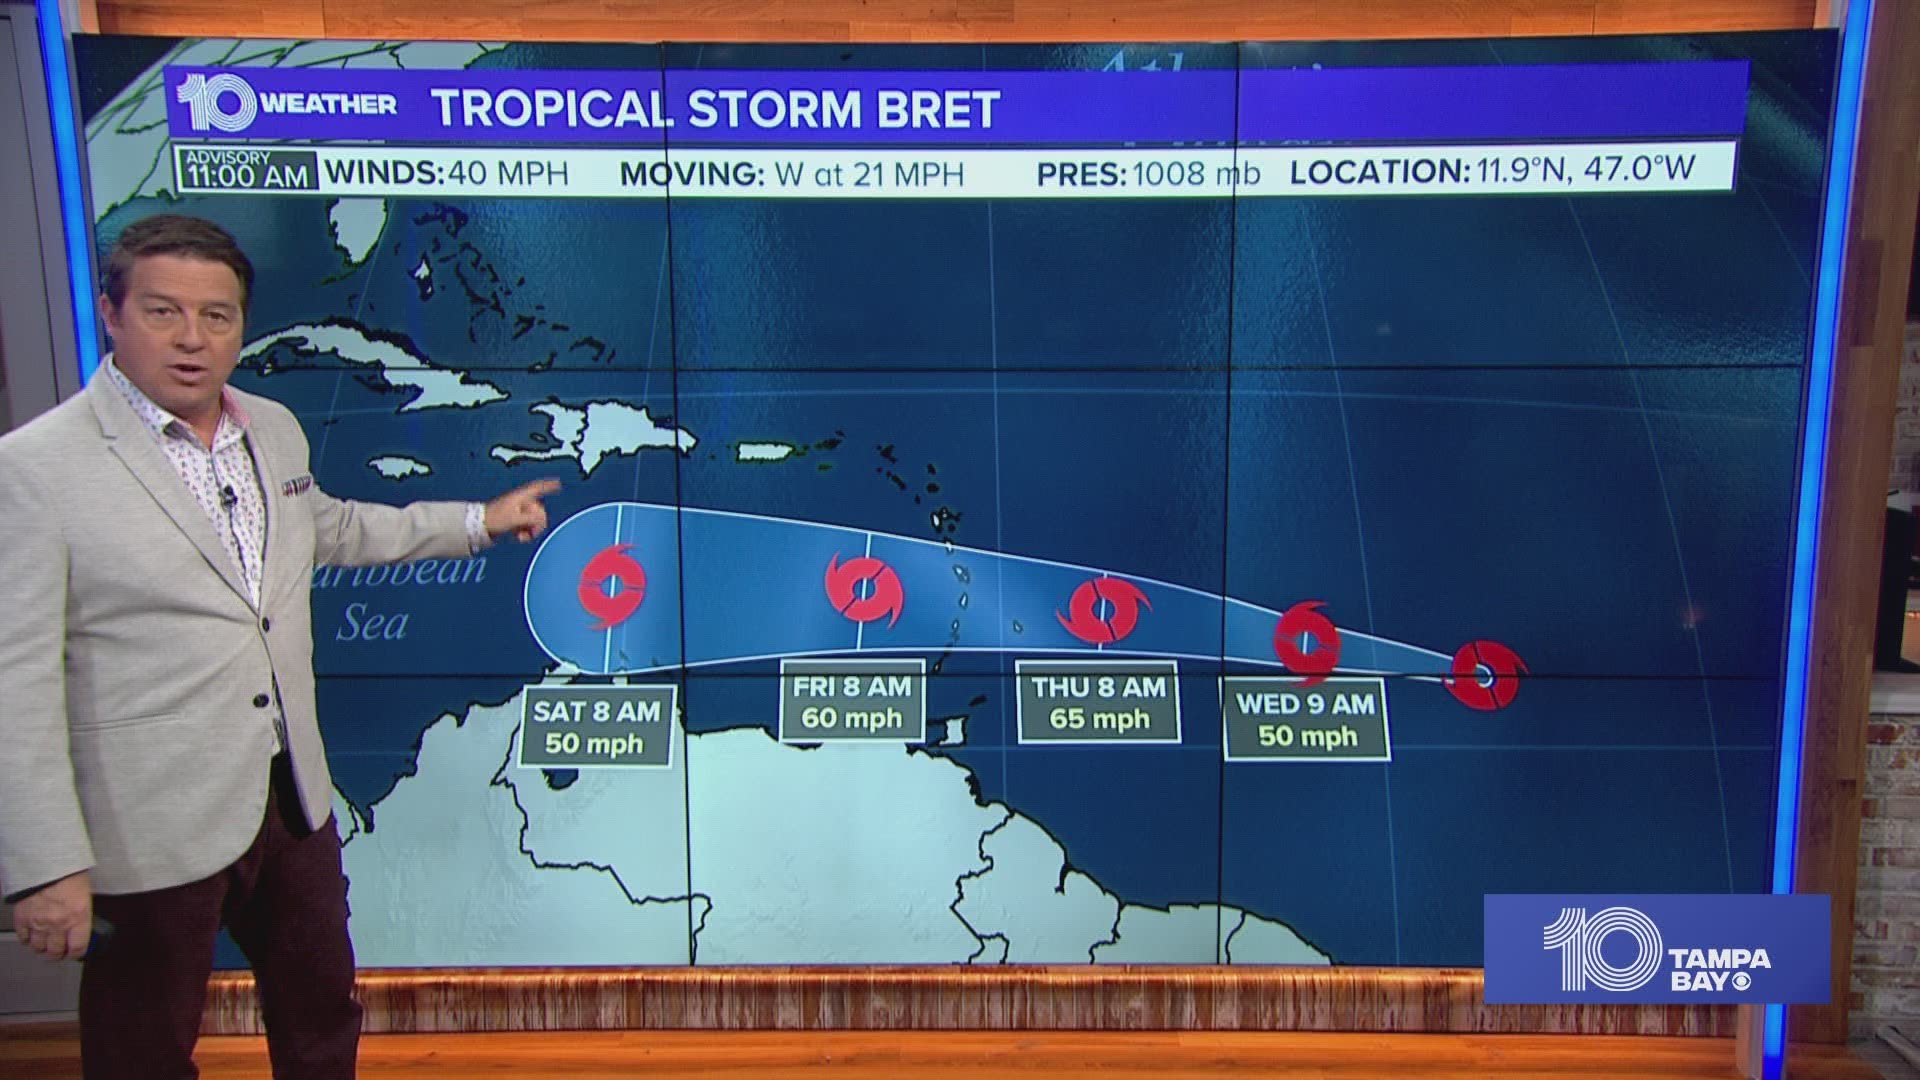 Tropical Storm Bret is expected to bring the risk of heavy rain, gusty winds and dangerous ocean conditions when it nears the Caribbean islands later this week.